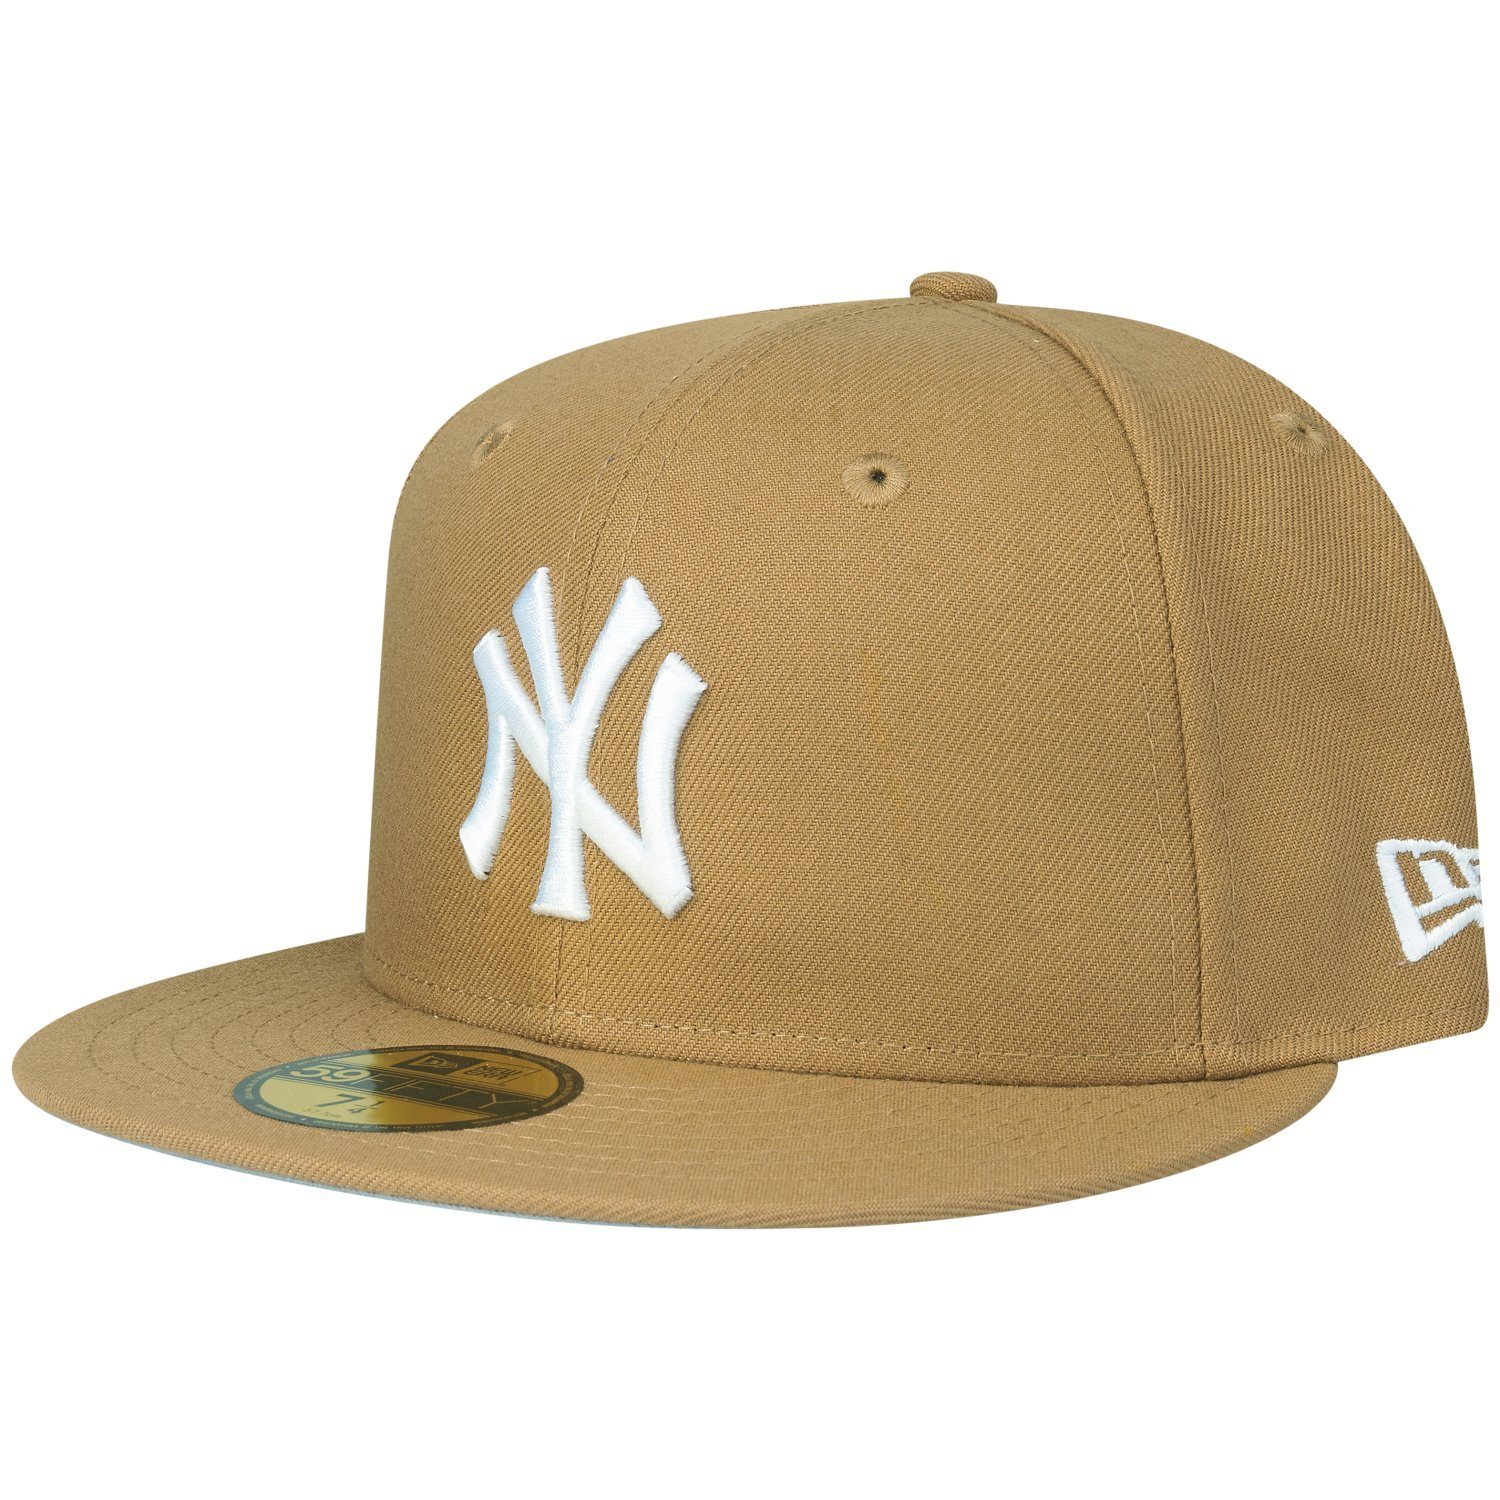 59Fifty Era Fitted New New York Cap Yankees